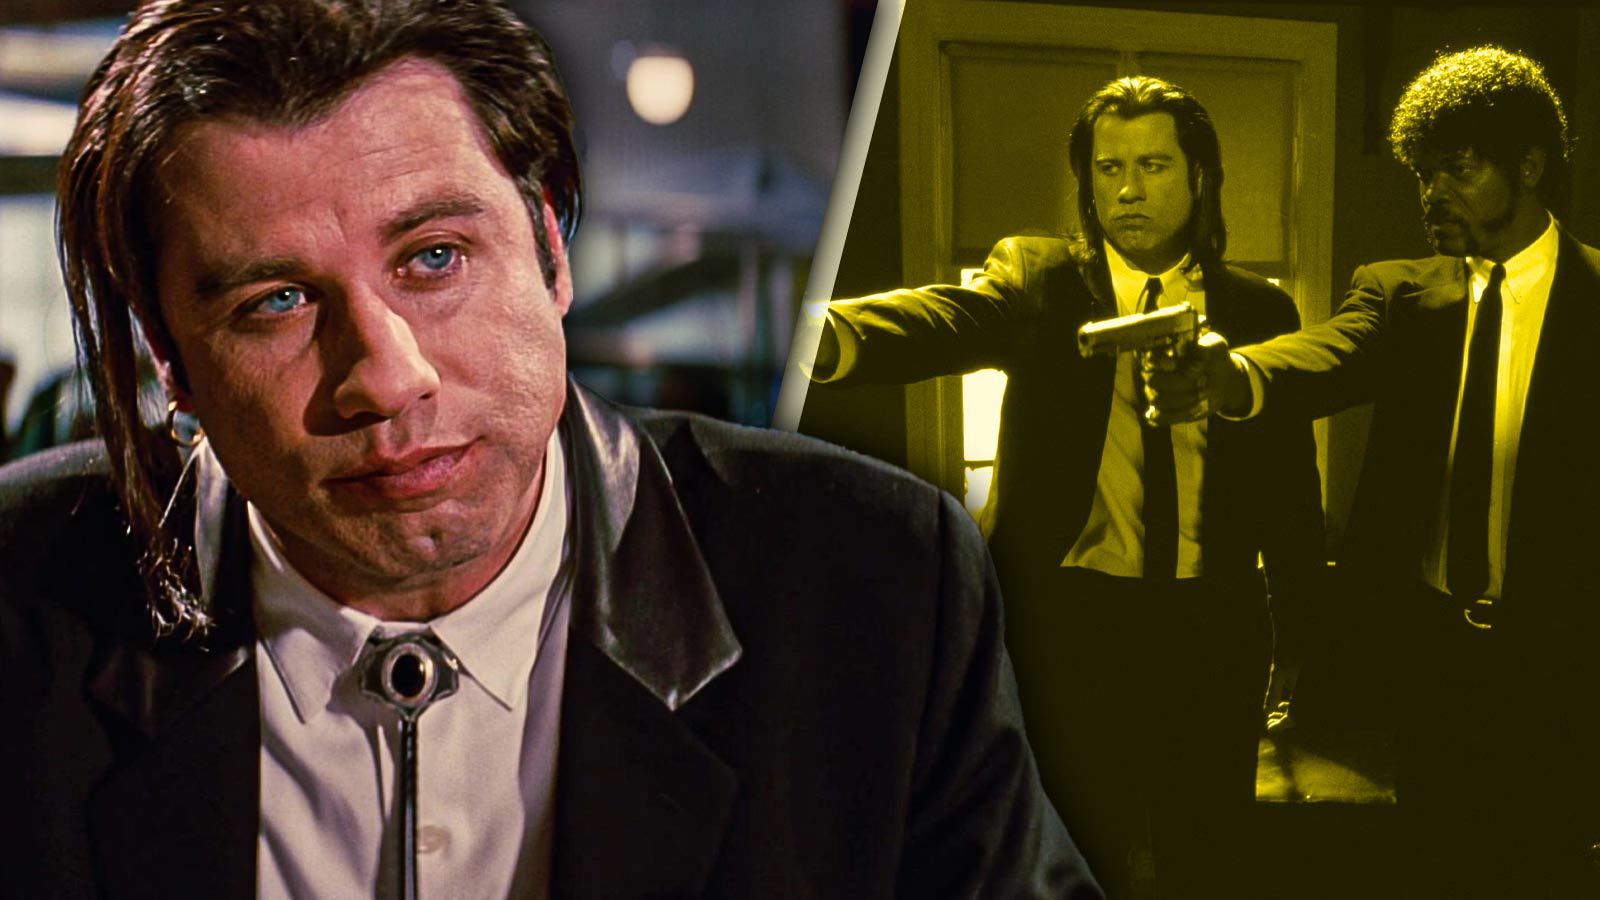 “I can’t keep up with it”: ‘Pulp Fiction’ Turned John Travolta’s Hollywood Career Into a Chaotic Mess That Reminded Him of the ‘70s